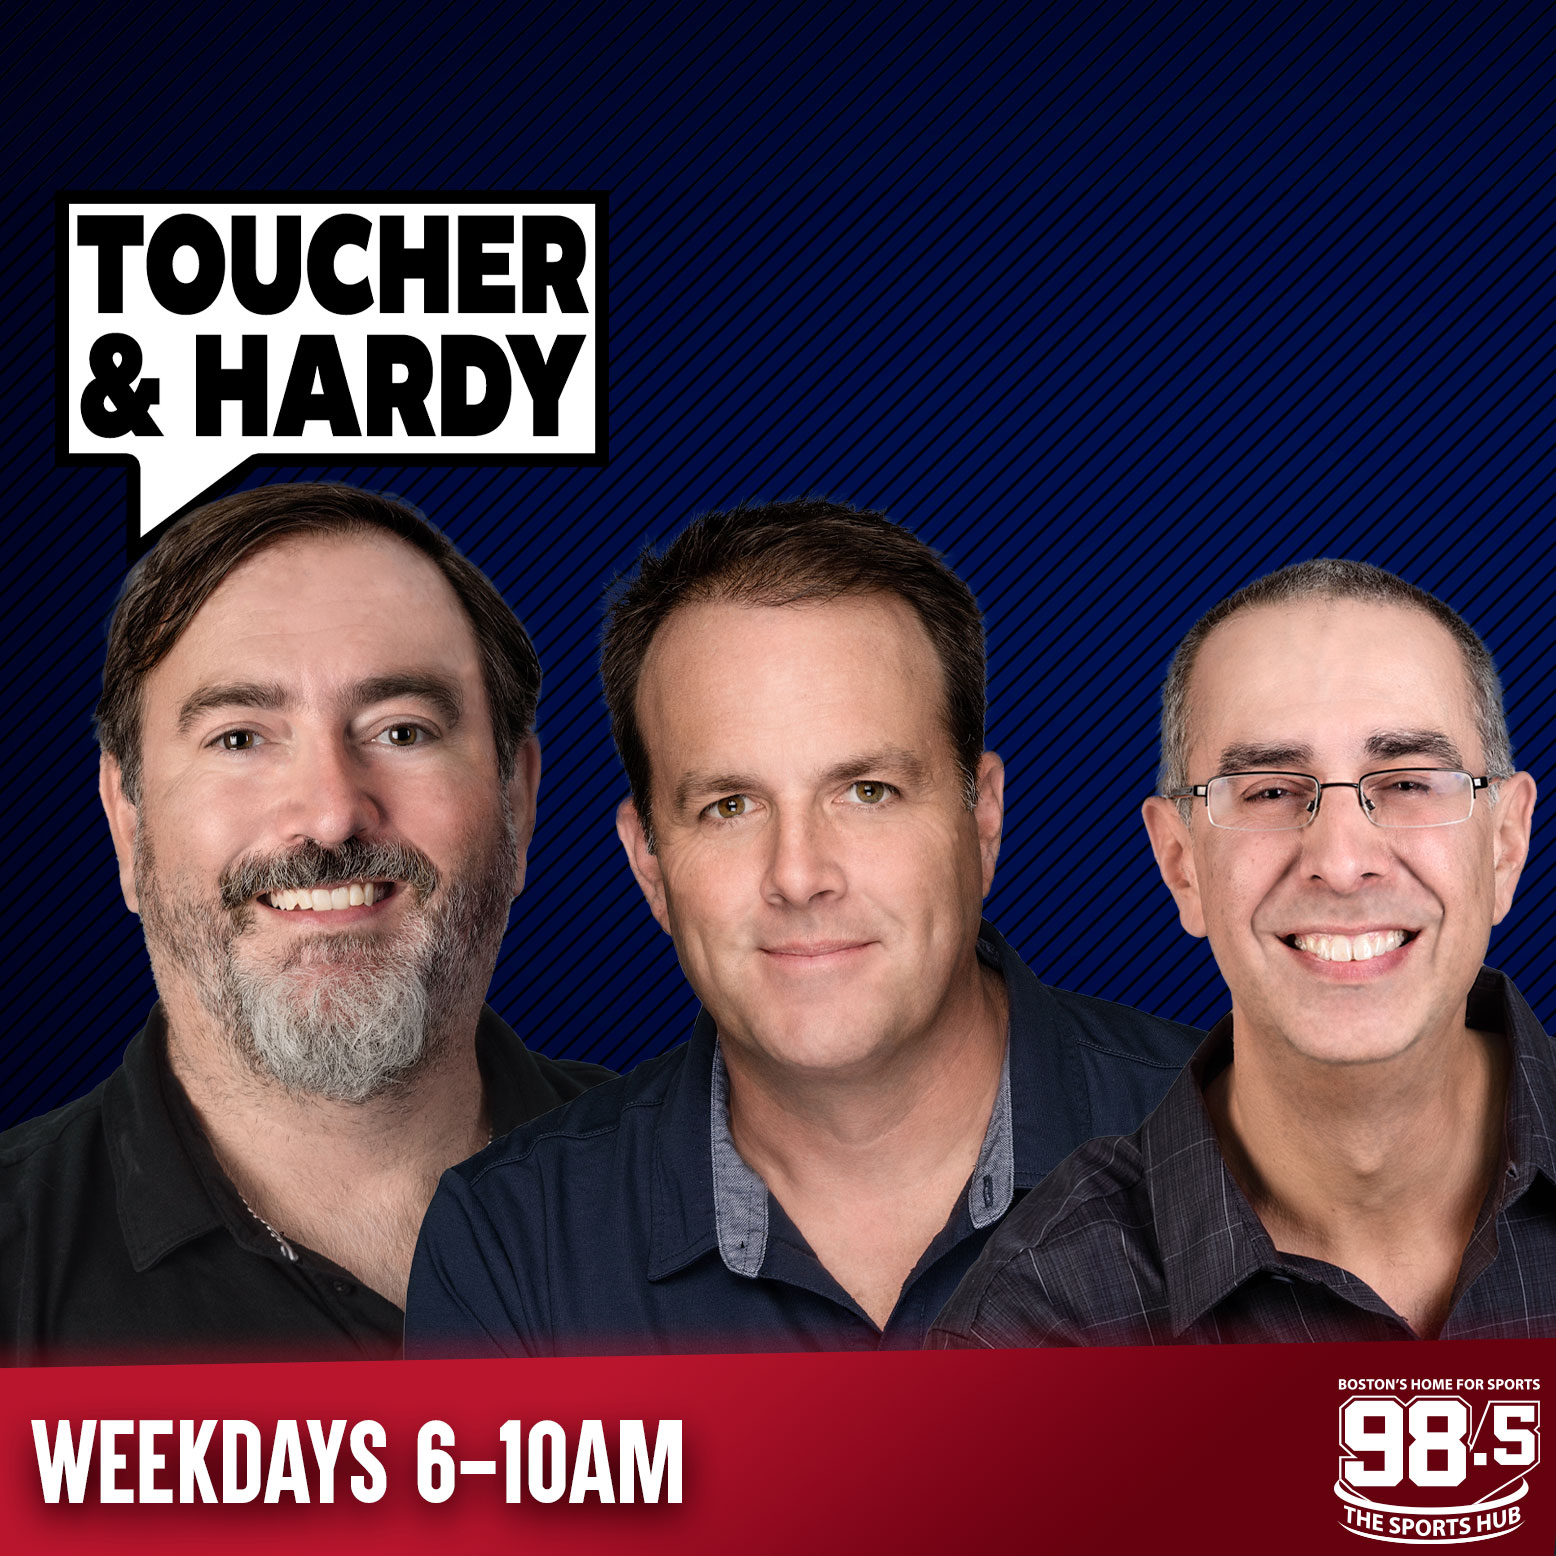 Bob Socci joins Toucher & Hardy from the finish line | The Email Bit | The Stack - 4/15 (Hour 4)